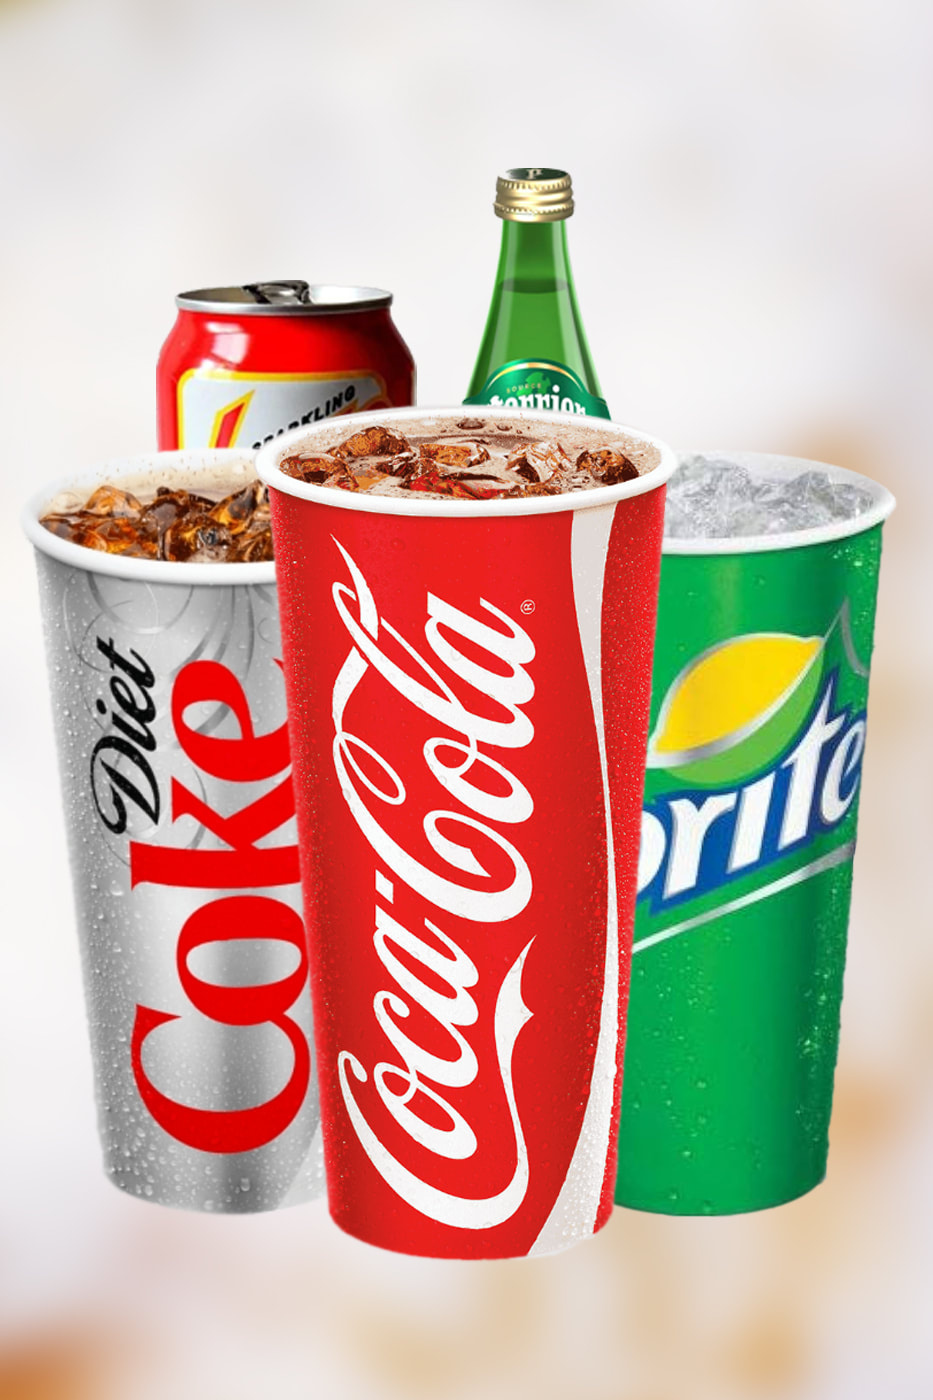 Fountain drinks combo by Sababa cuisine